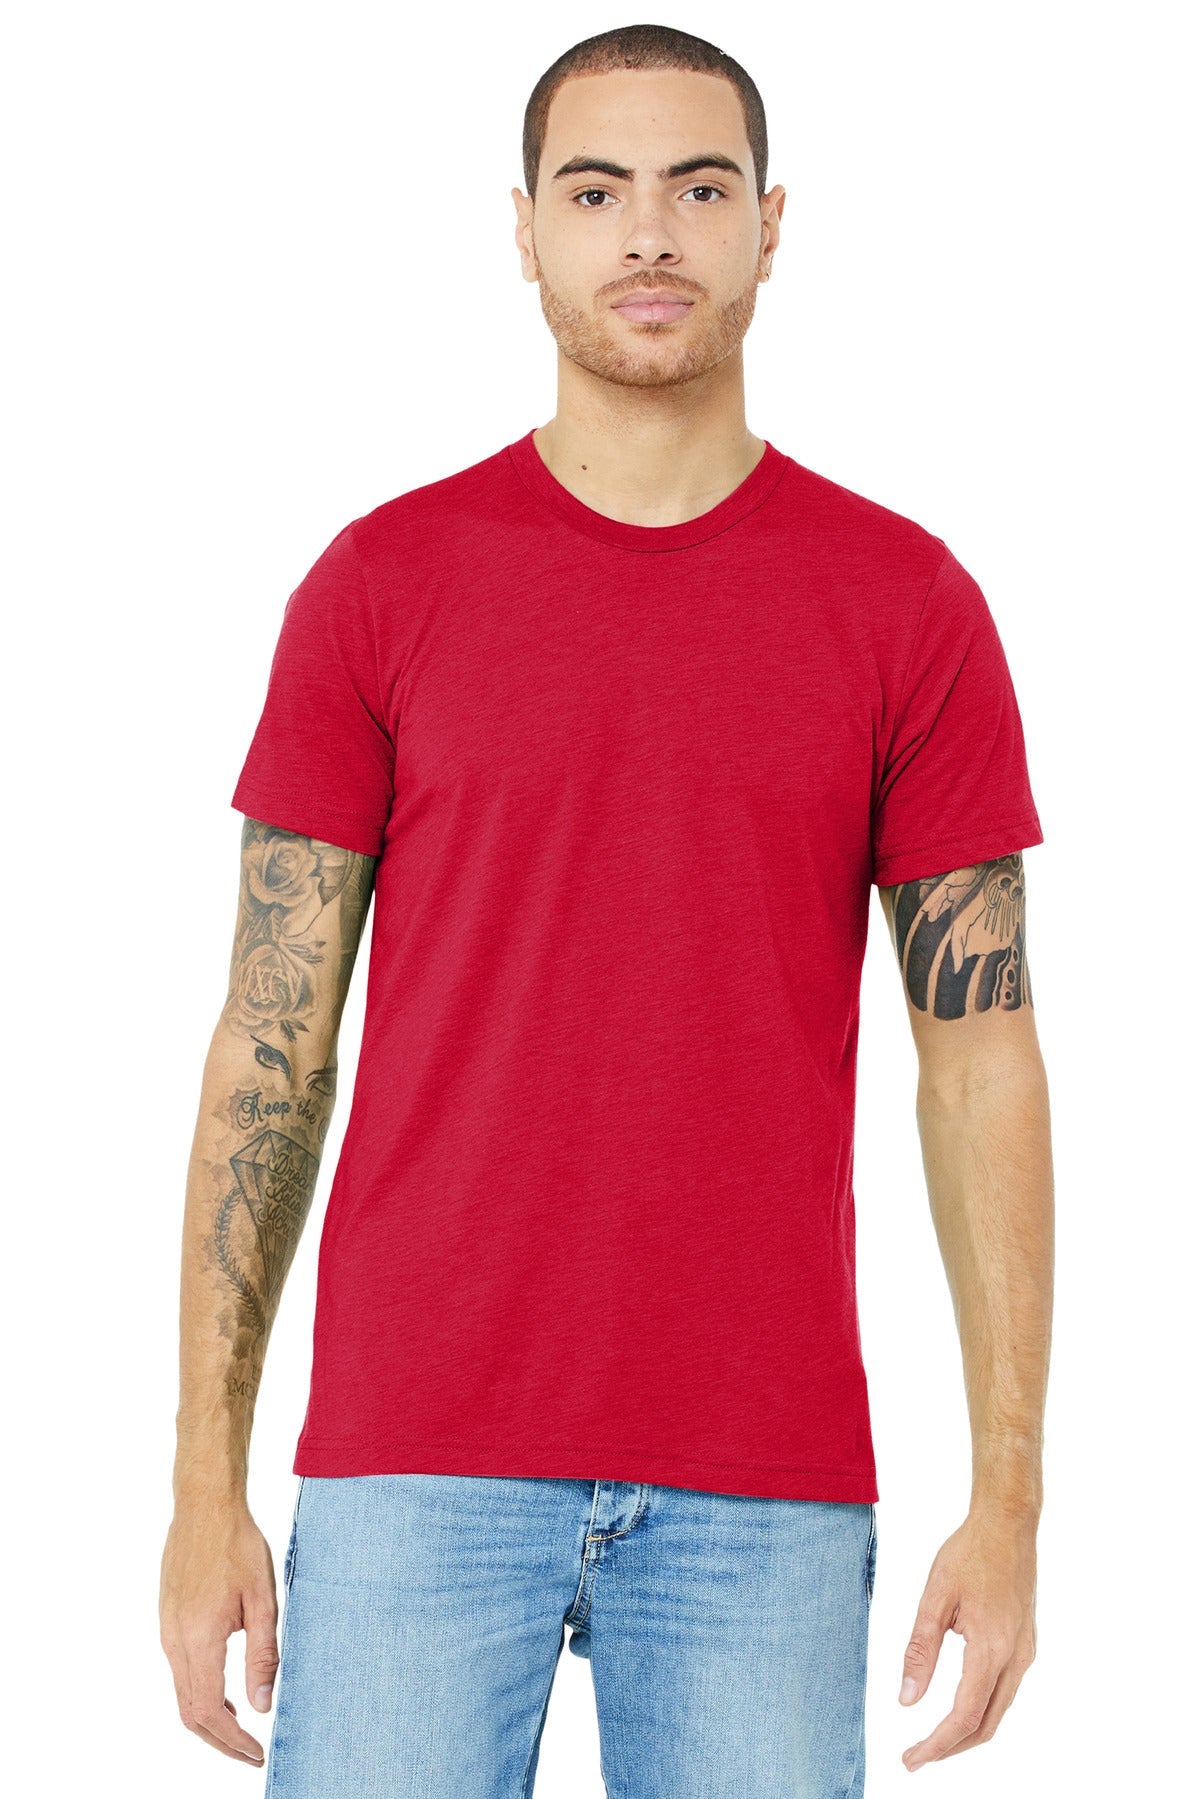 BELLA+CANVAS ® Unisex Triblend Short Sleeve Tee. BC3413 [Solid Red Triblend] - DFW Impression